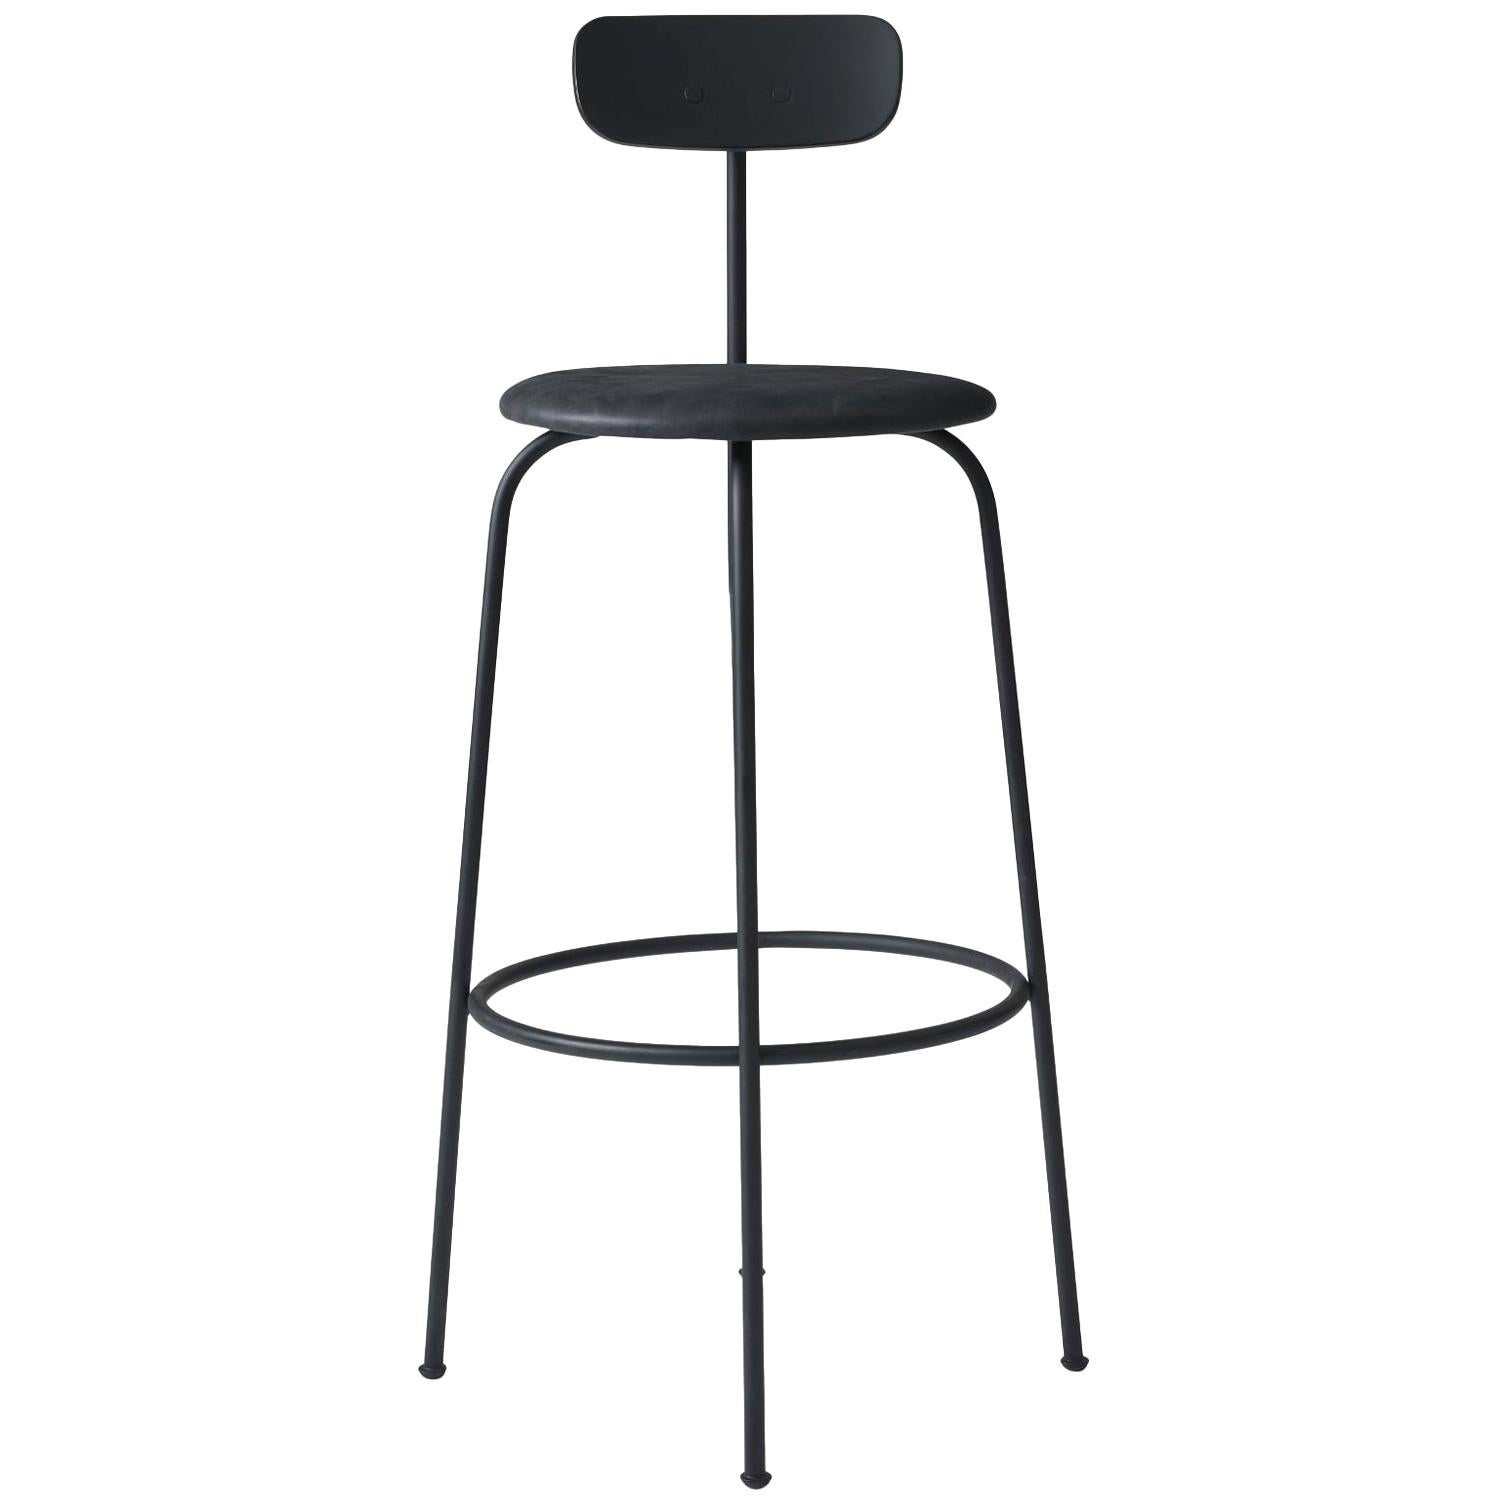 Bar Stool by Afteroom, Black Steel Frame, with Black Leather Upholstery